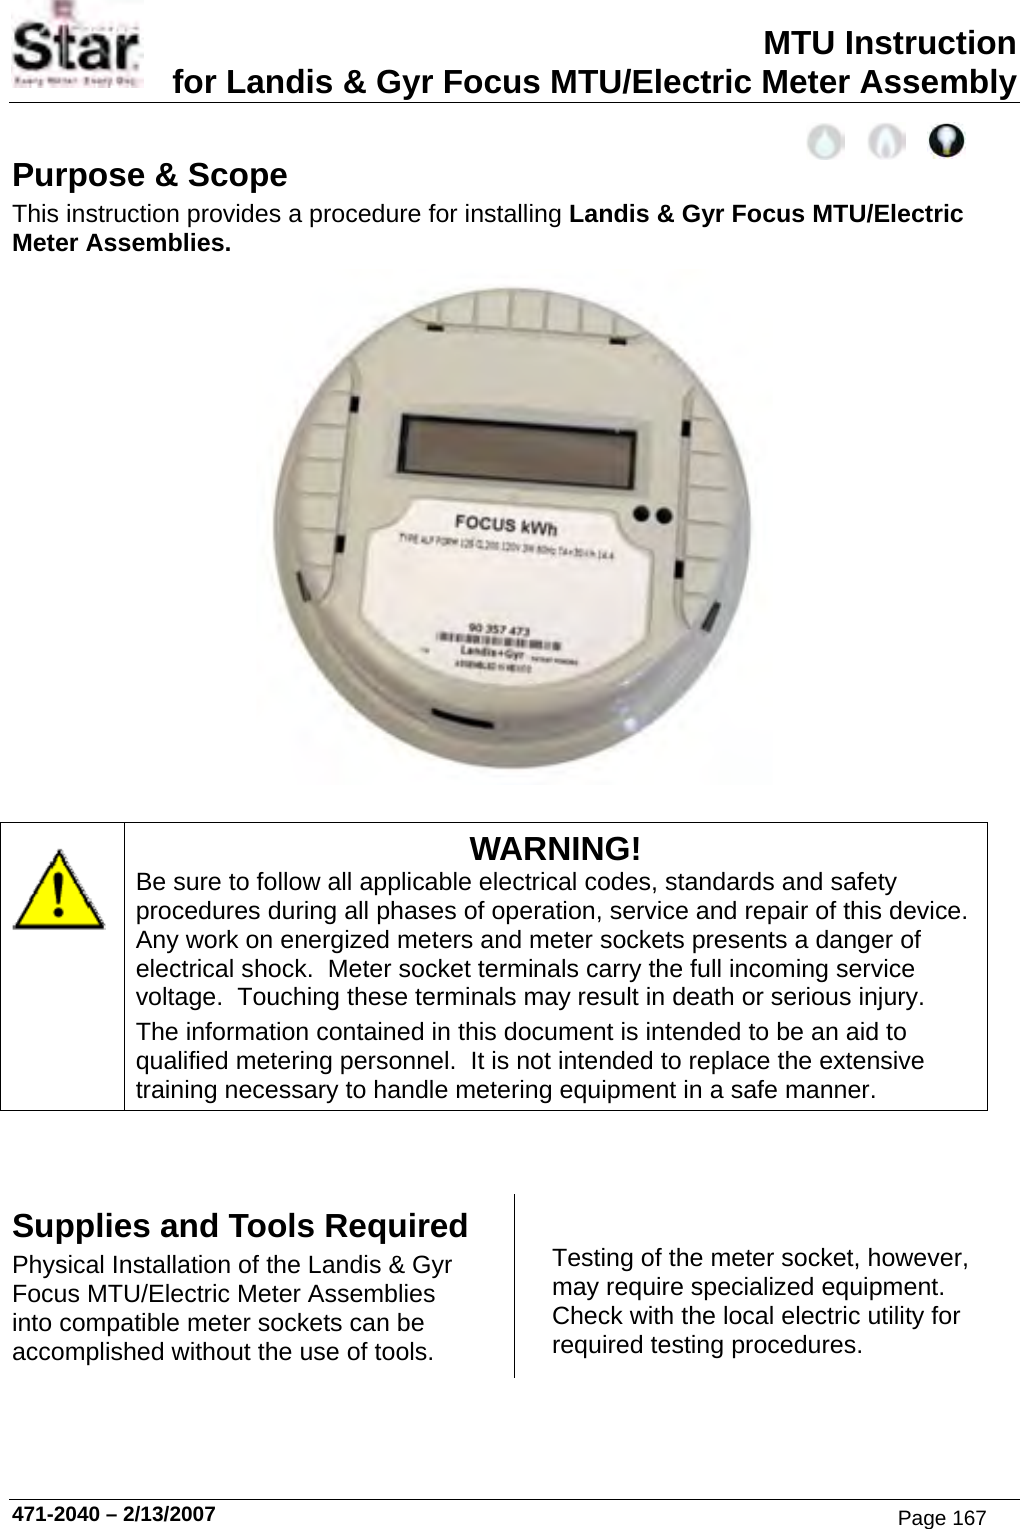 MTU Instruction for Landis &amp; Gyr Focus MTU/Electric Meter Assembly Purpose &amp; Scope This instruction provides a procedure for installing Landis &amp; Gyr Focus MTU/Electric Meter Assemblies.   WARNING! Be sure to follow all applicable electrical codes, standards and safety procedures during all phases of operation, service and repair of this device.  Any work on energized meters and meter sockets presents a danger of electrical shock.  Meter socket terminals carry the full incoming service voltage.  Touching these terminals may result in death or serious injury. The information contained in this document is intended to be an aid to qualified metering personnel.  It is not intended to replace the extensive training necessary to handle metering equipment in a safe manner.   Supplies and Tools Required Physical Installation of the Landis &amp; Gyr Focus MTU/Electric Meter Assemblies into compatible meter sockets can be accomplished without the use of tools. Testing of the meter socket, however, may require specialized equipment.  Check with the local electric utility for required testing procedures. 471-2040 – 2/13/2007 Page 167